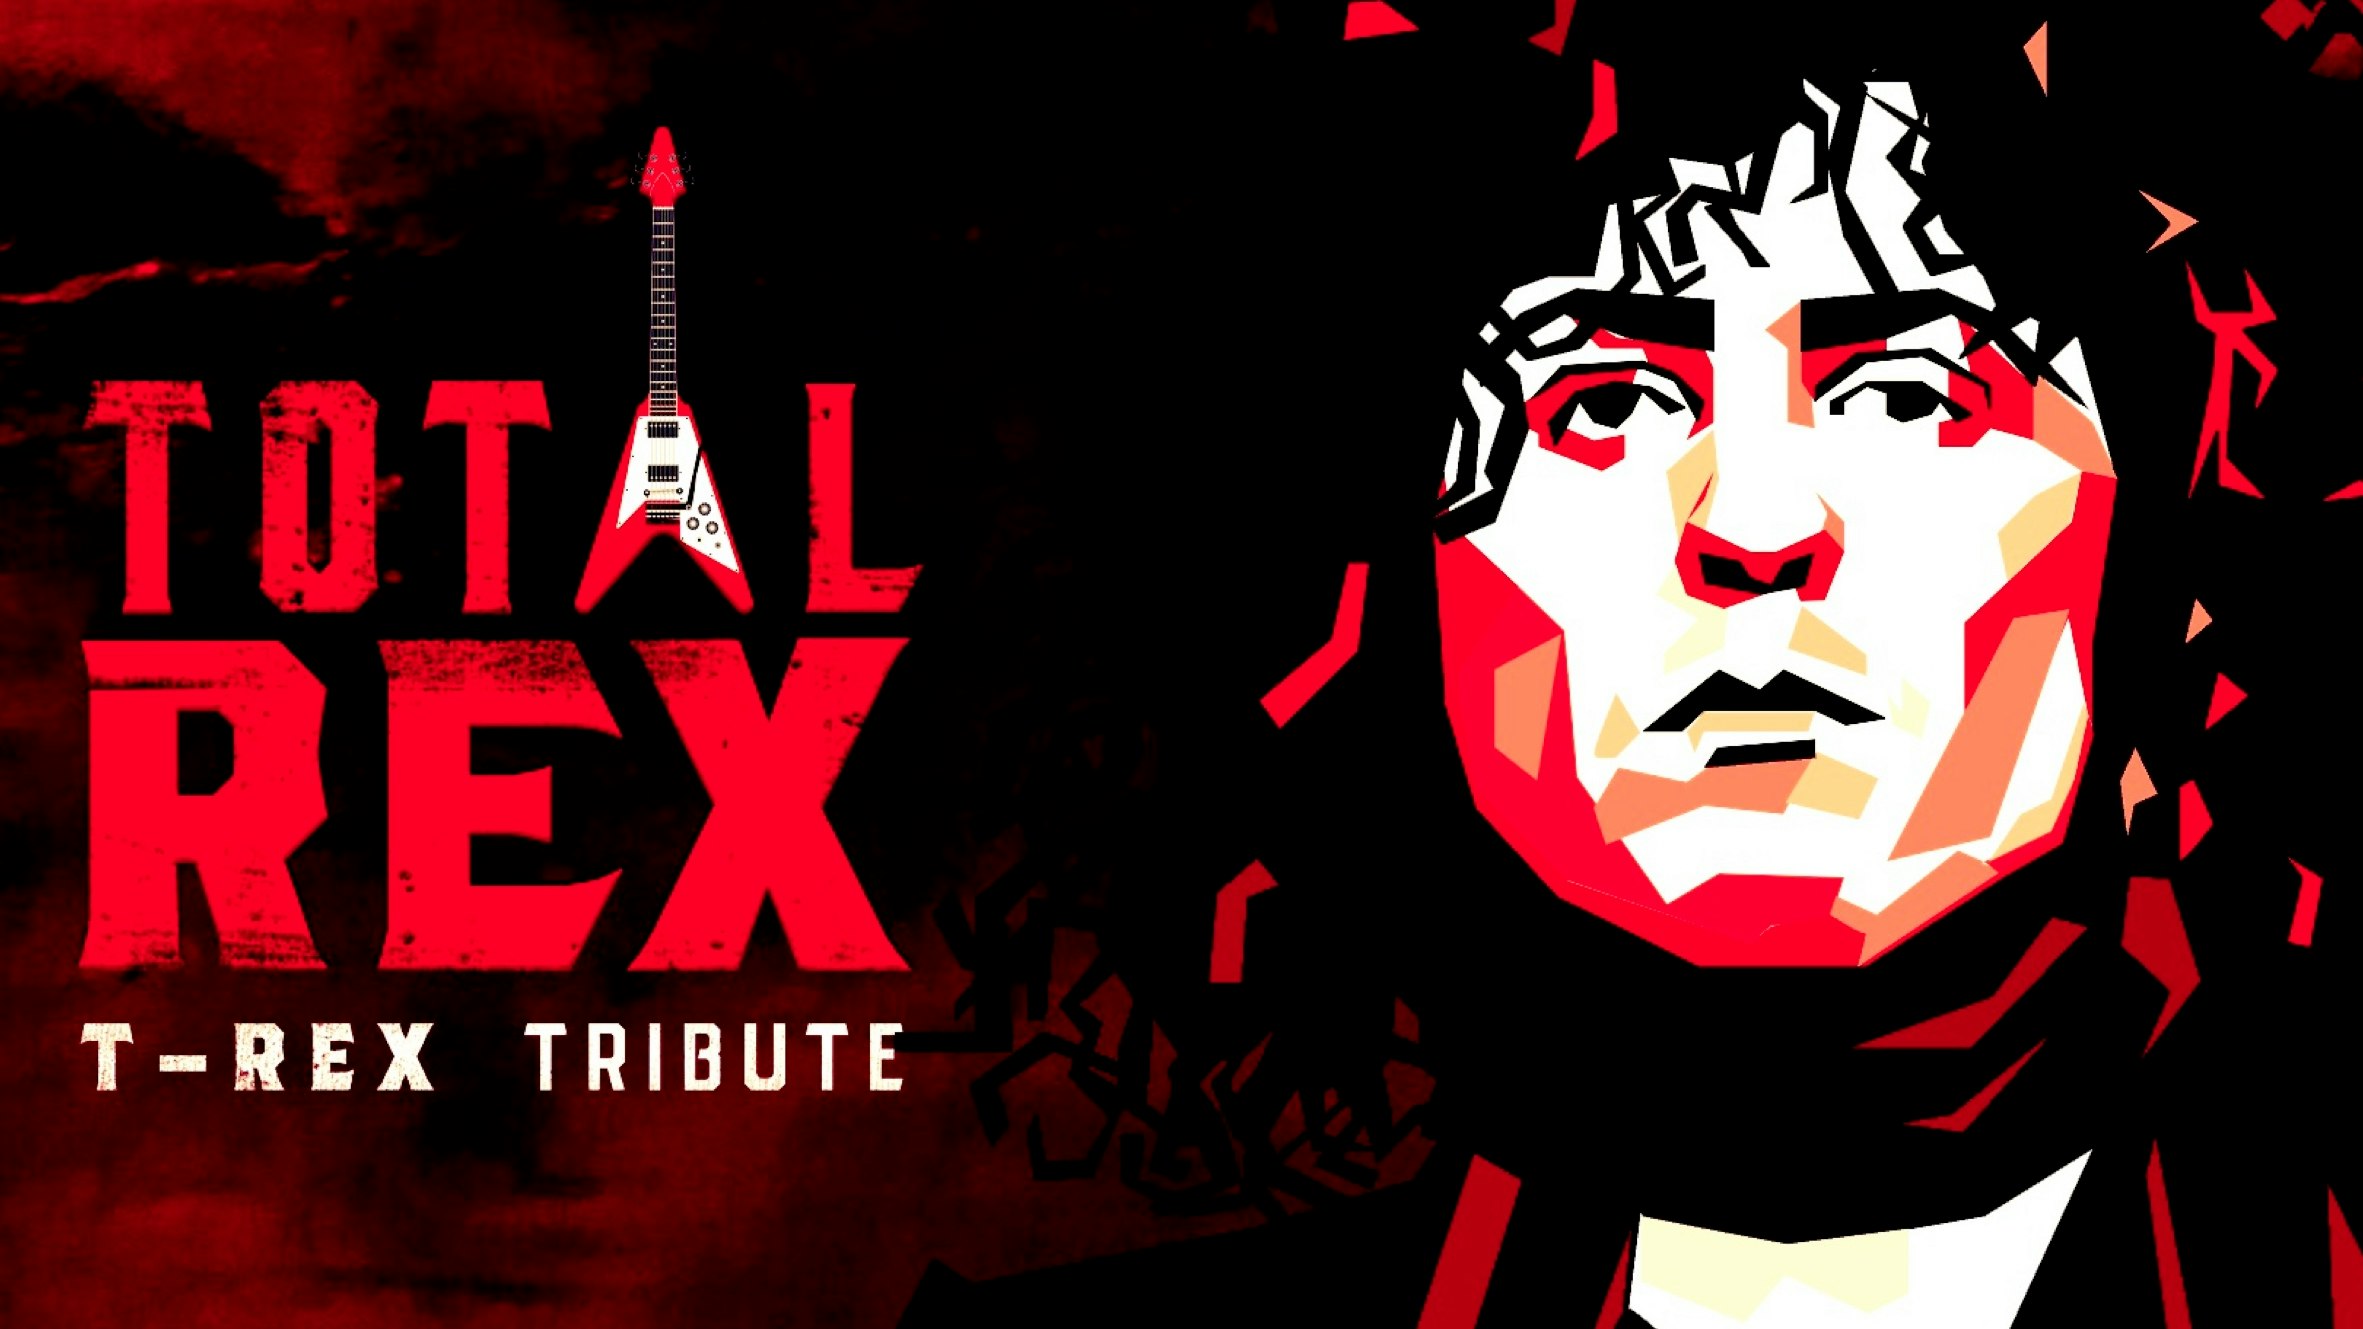 🎸 MARC BOLAN & T-REX  – with leading tribute Total Rex